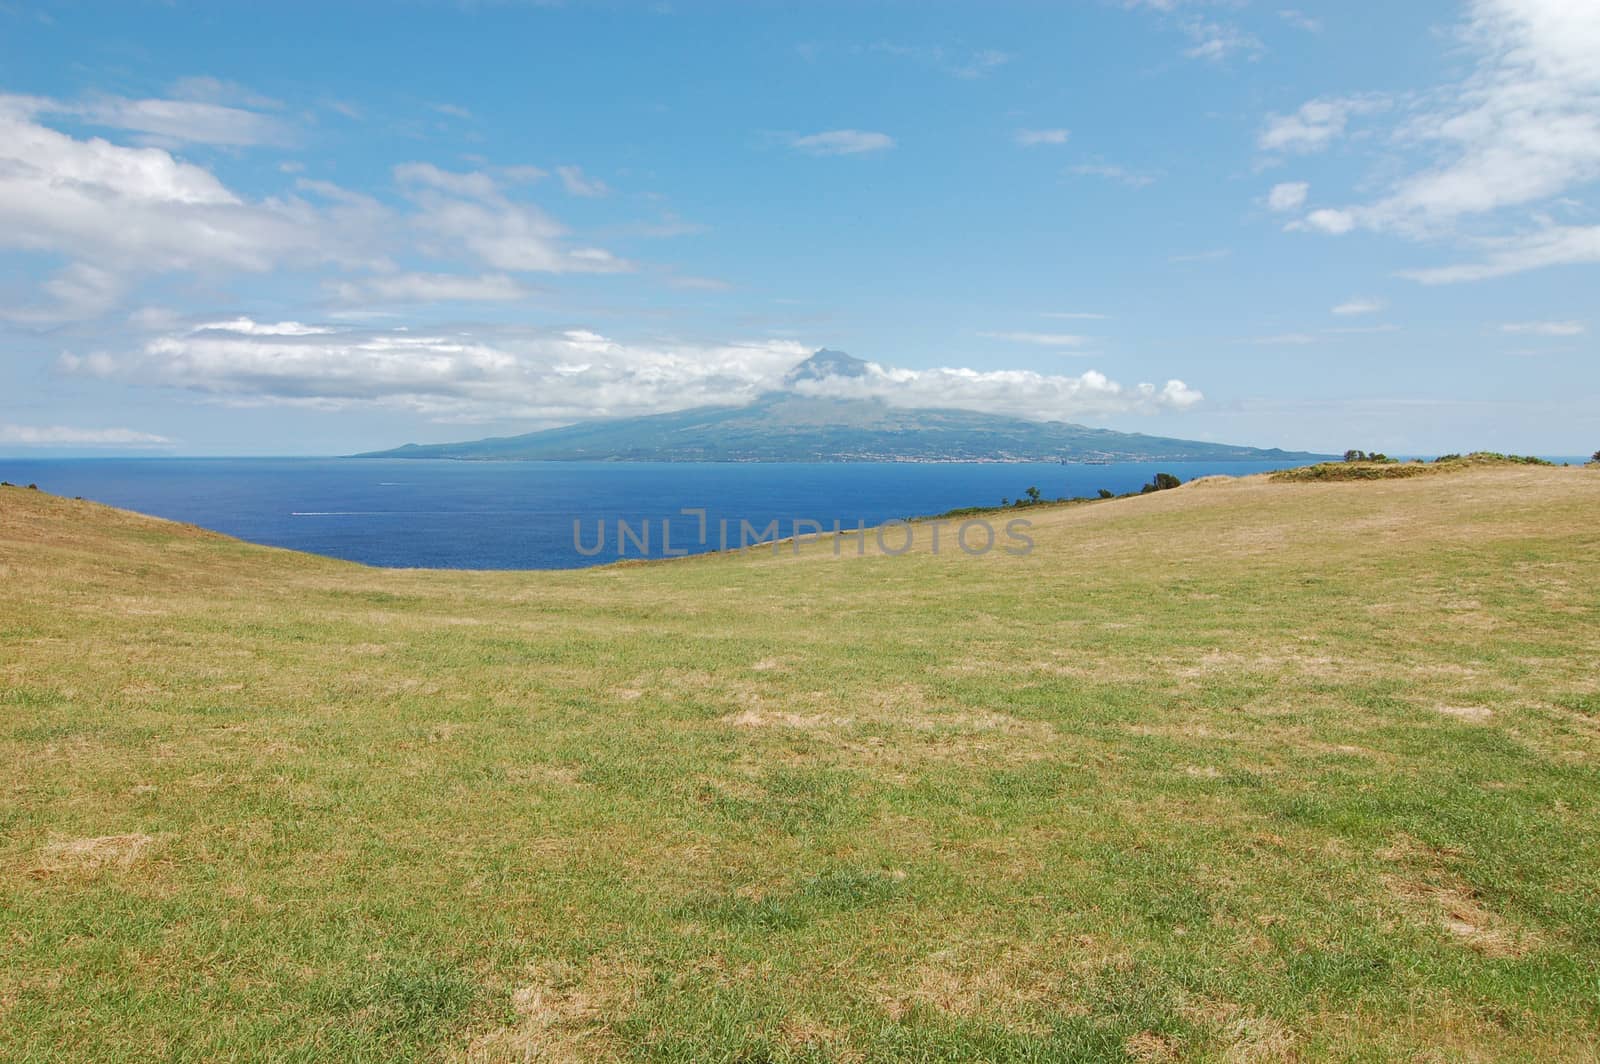 View of pico island from Faial island, Azores Portugal